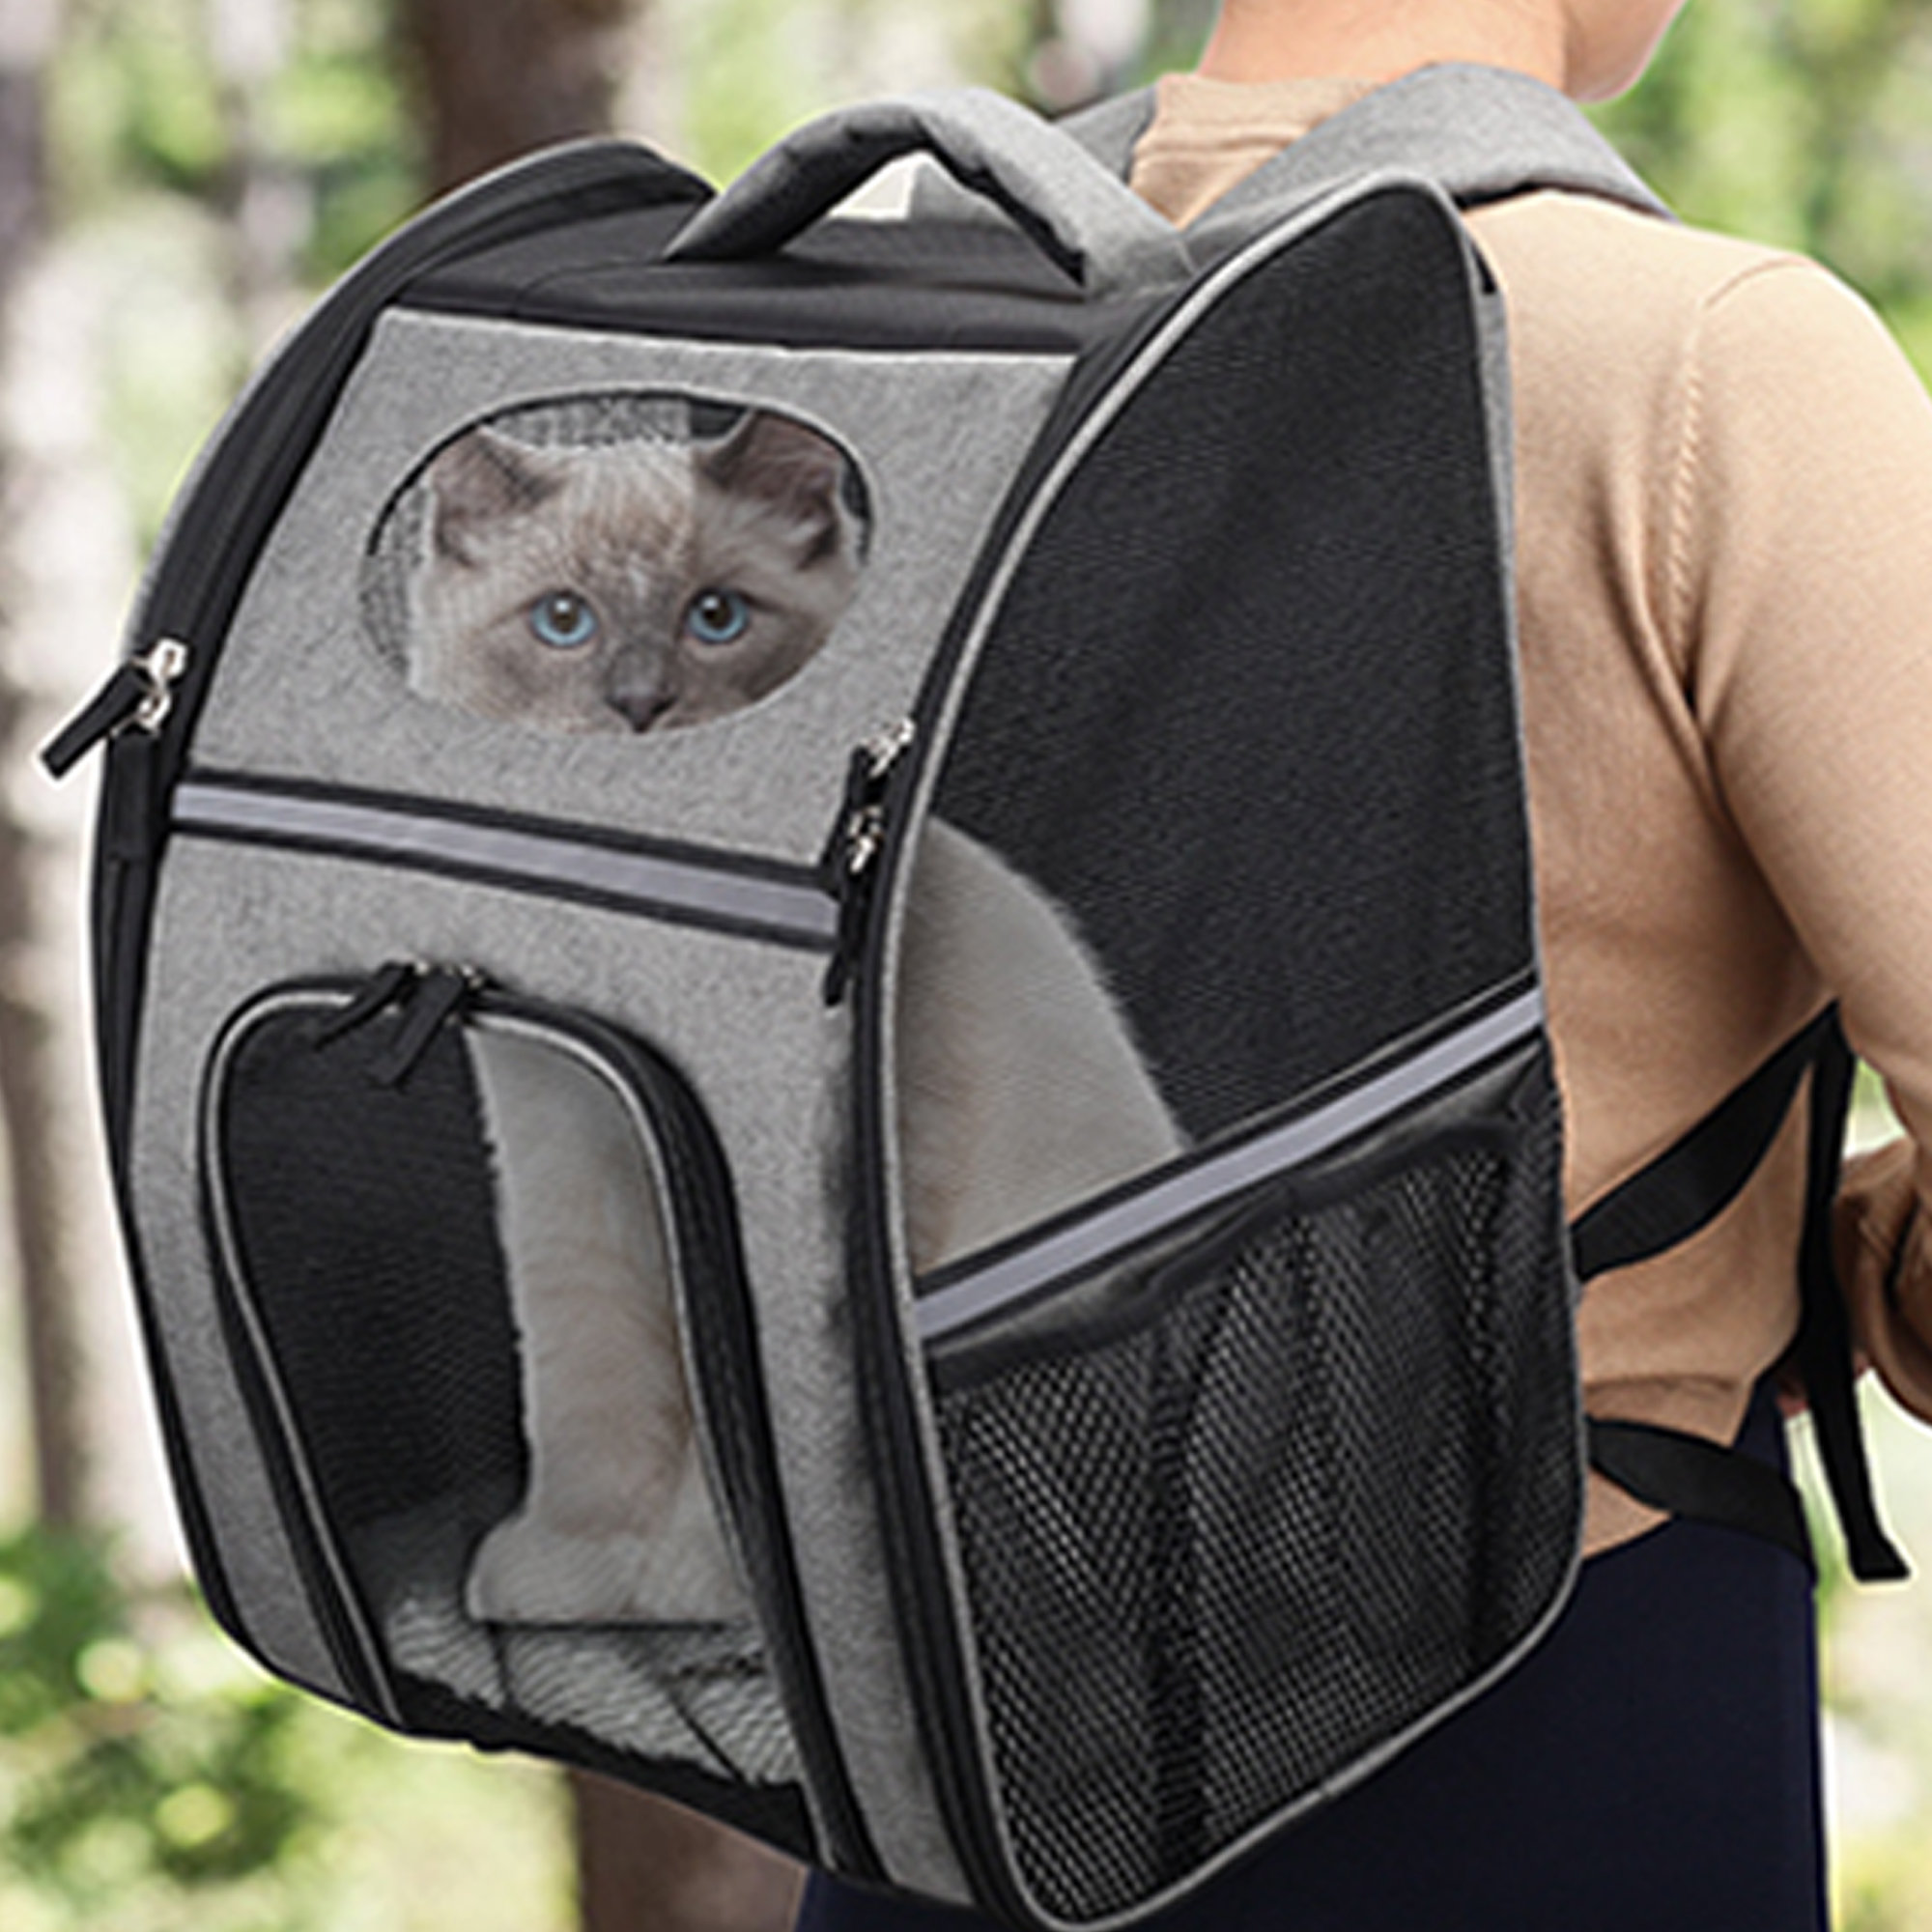 Tucker Murphy Pet Cat Carriers for Large Cats 20 lbs+, Soft Sided Pet Carrier Bag for Dogs, Portable Large Dog Carrier- Collapsible Folding Pet Travel